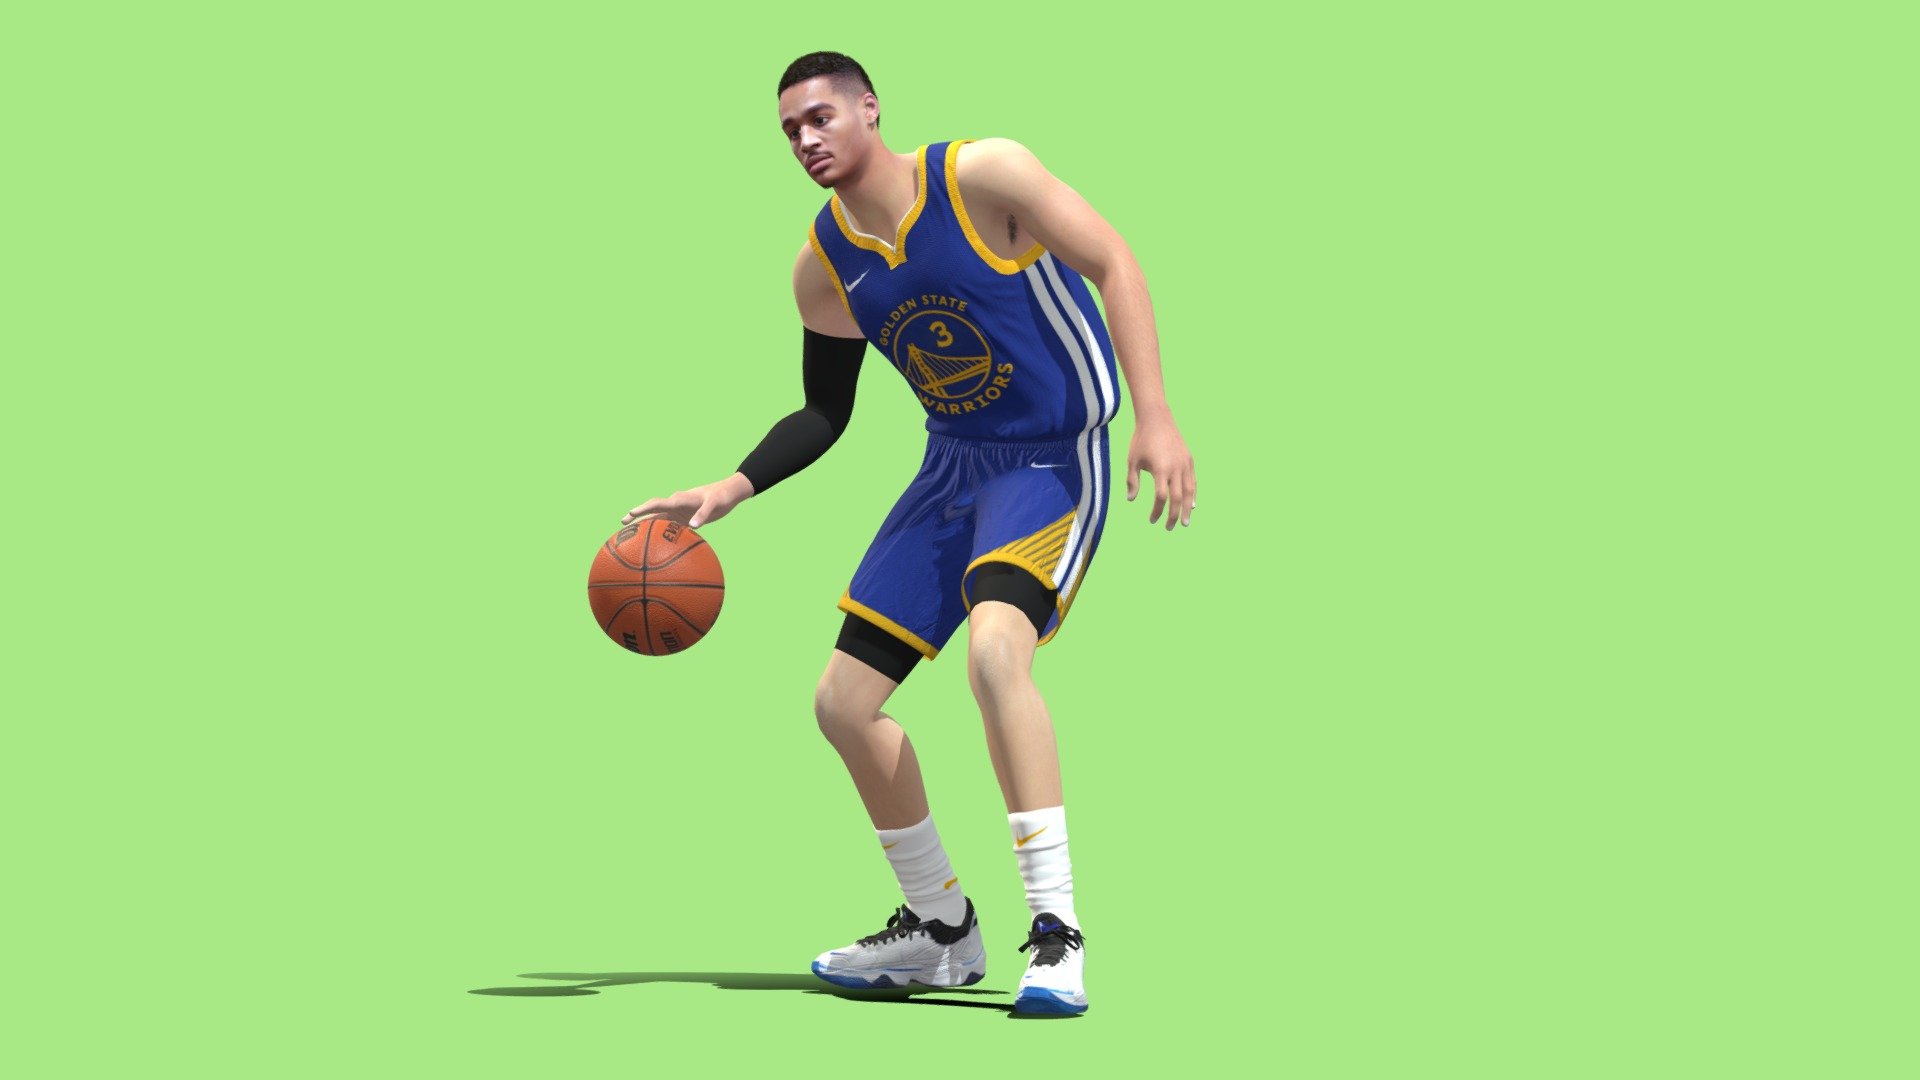 3D NBA Jordan and Other Basketball Players Wallpaper Home or